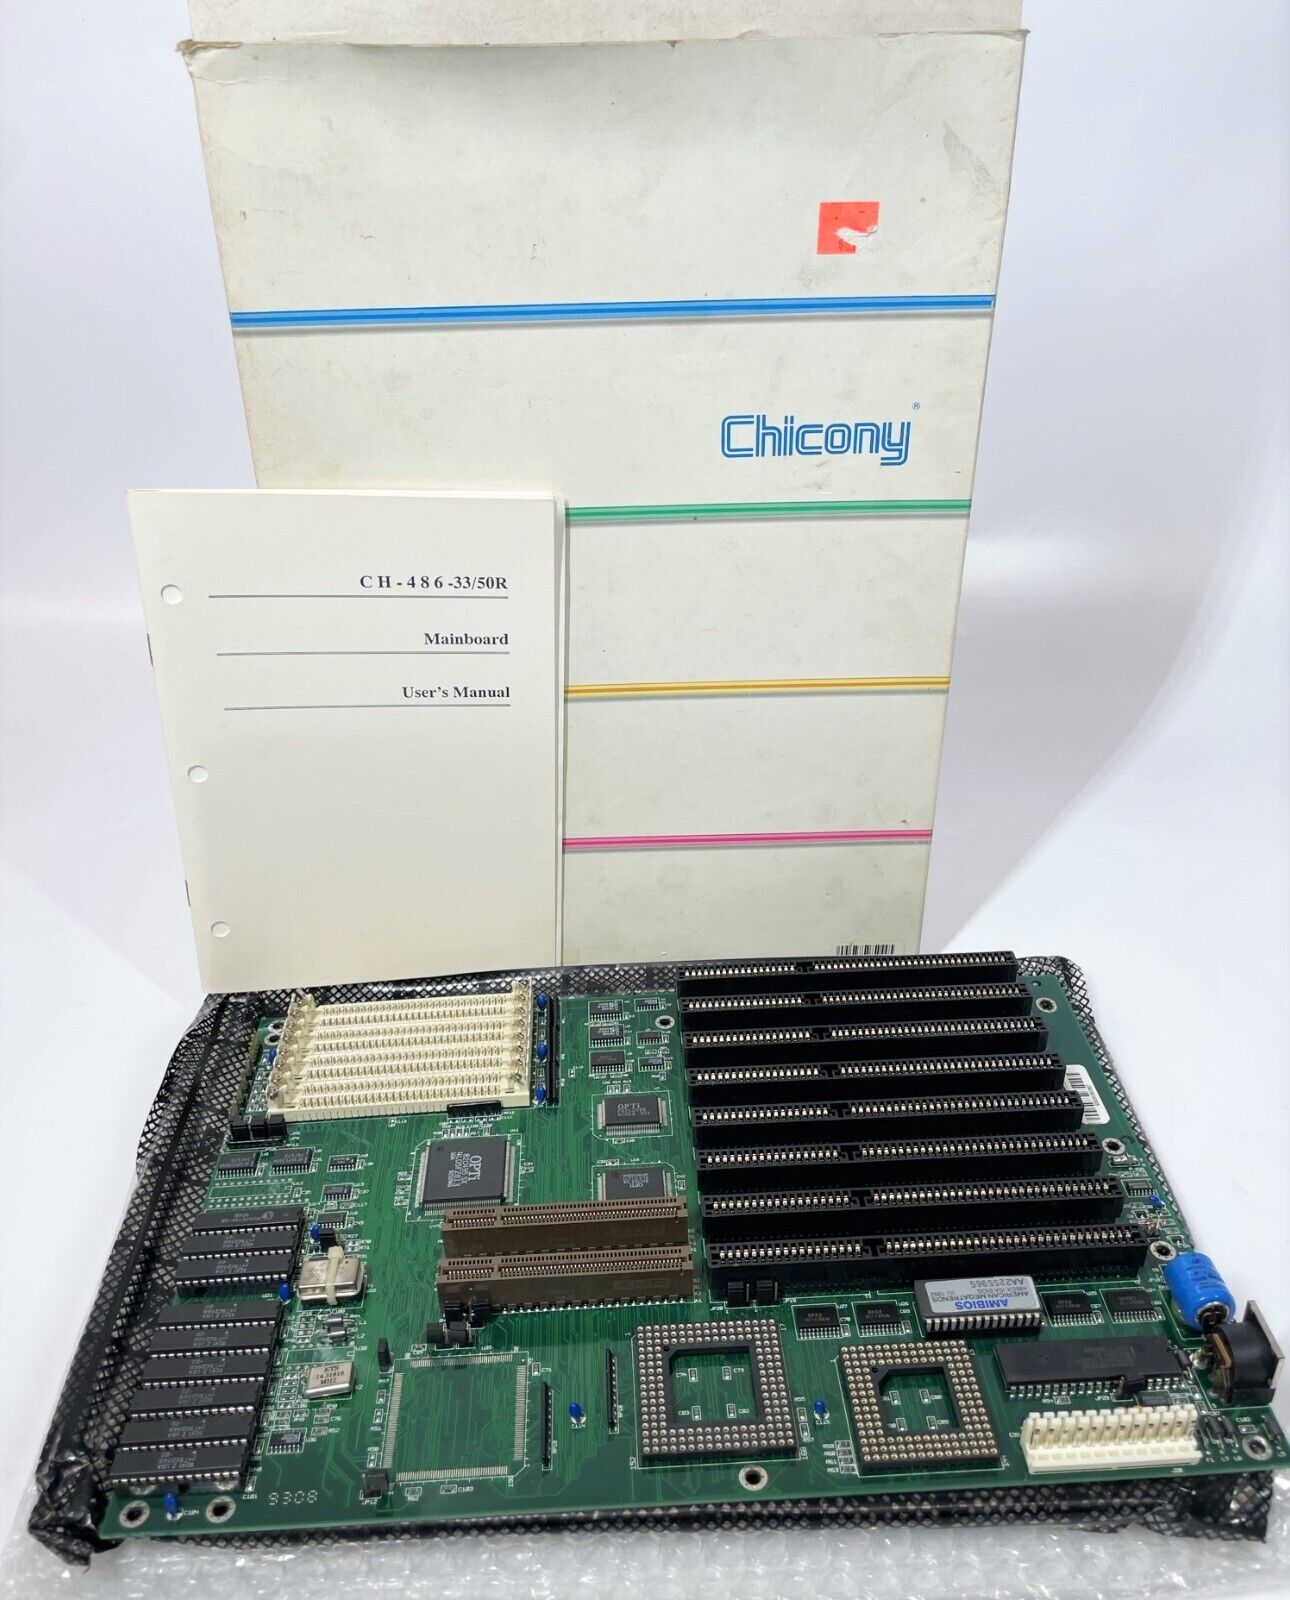 NEW NOS Vintage Chicony CH-486-33/50R Home Computer PC Motherboard w/ Manual